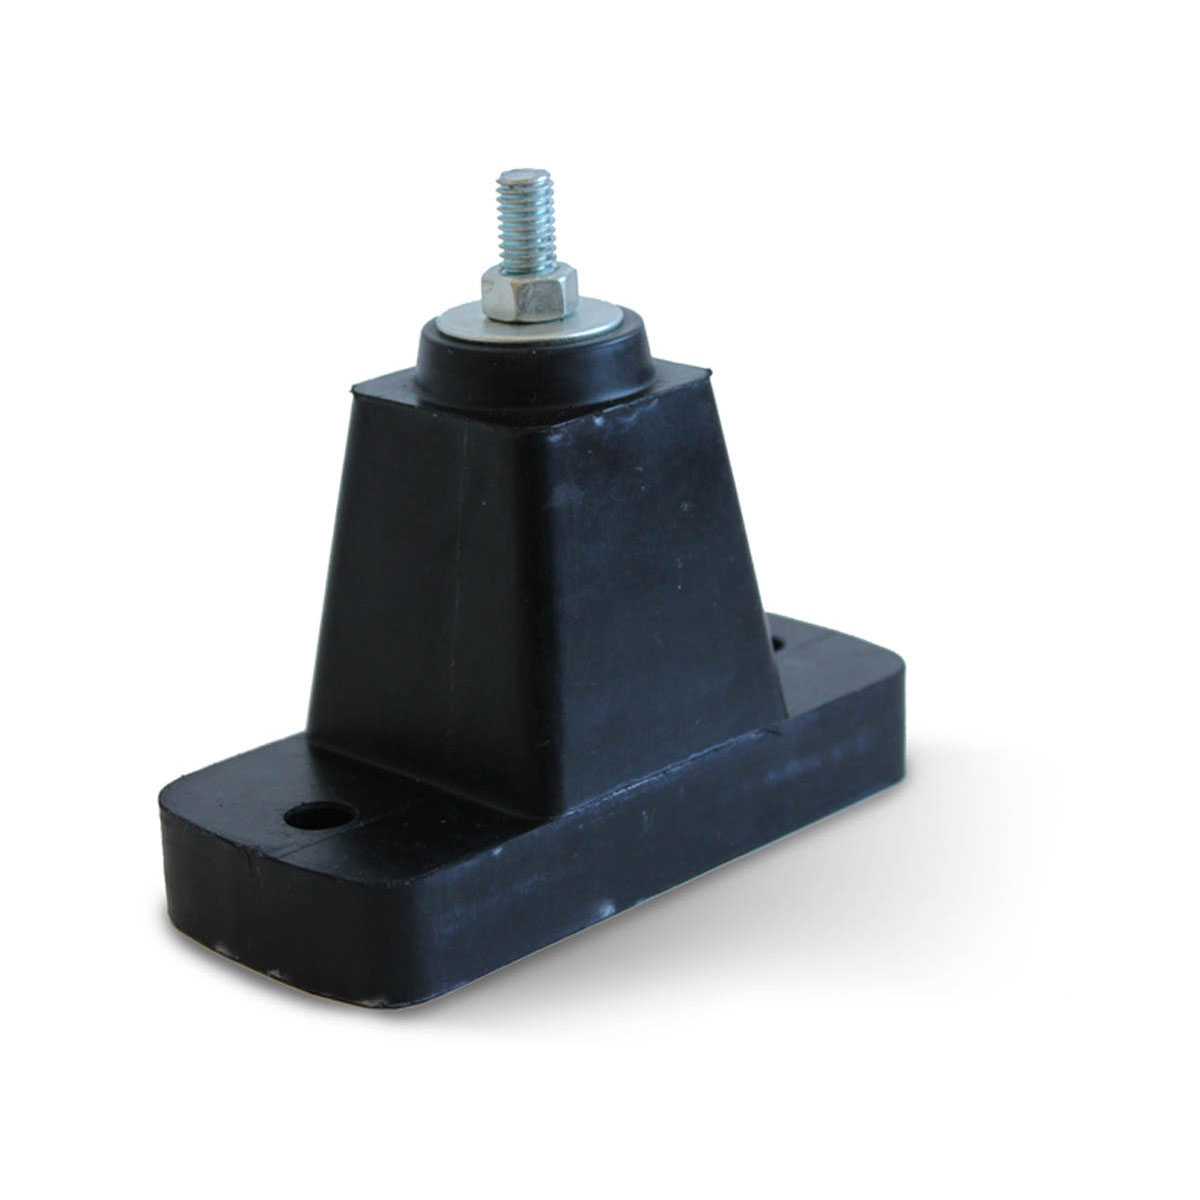 High Quality Anti-Vibration Support Rubber Foot for A/C HVAC